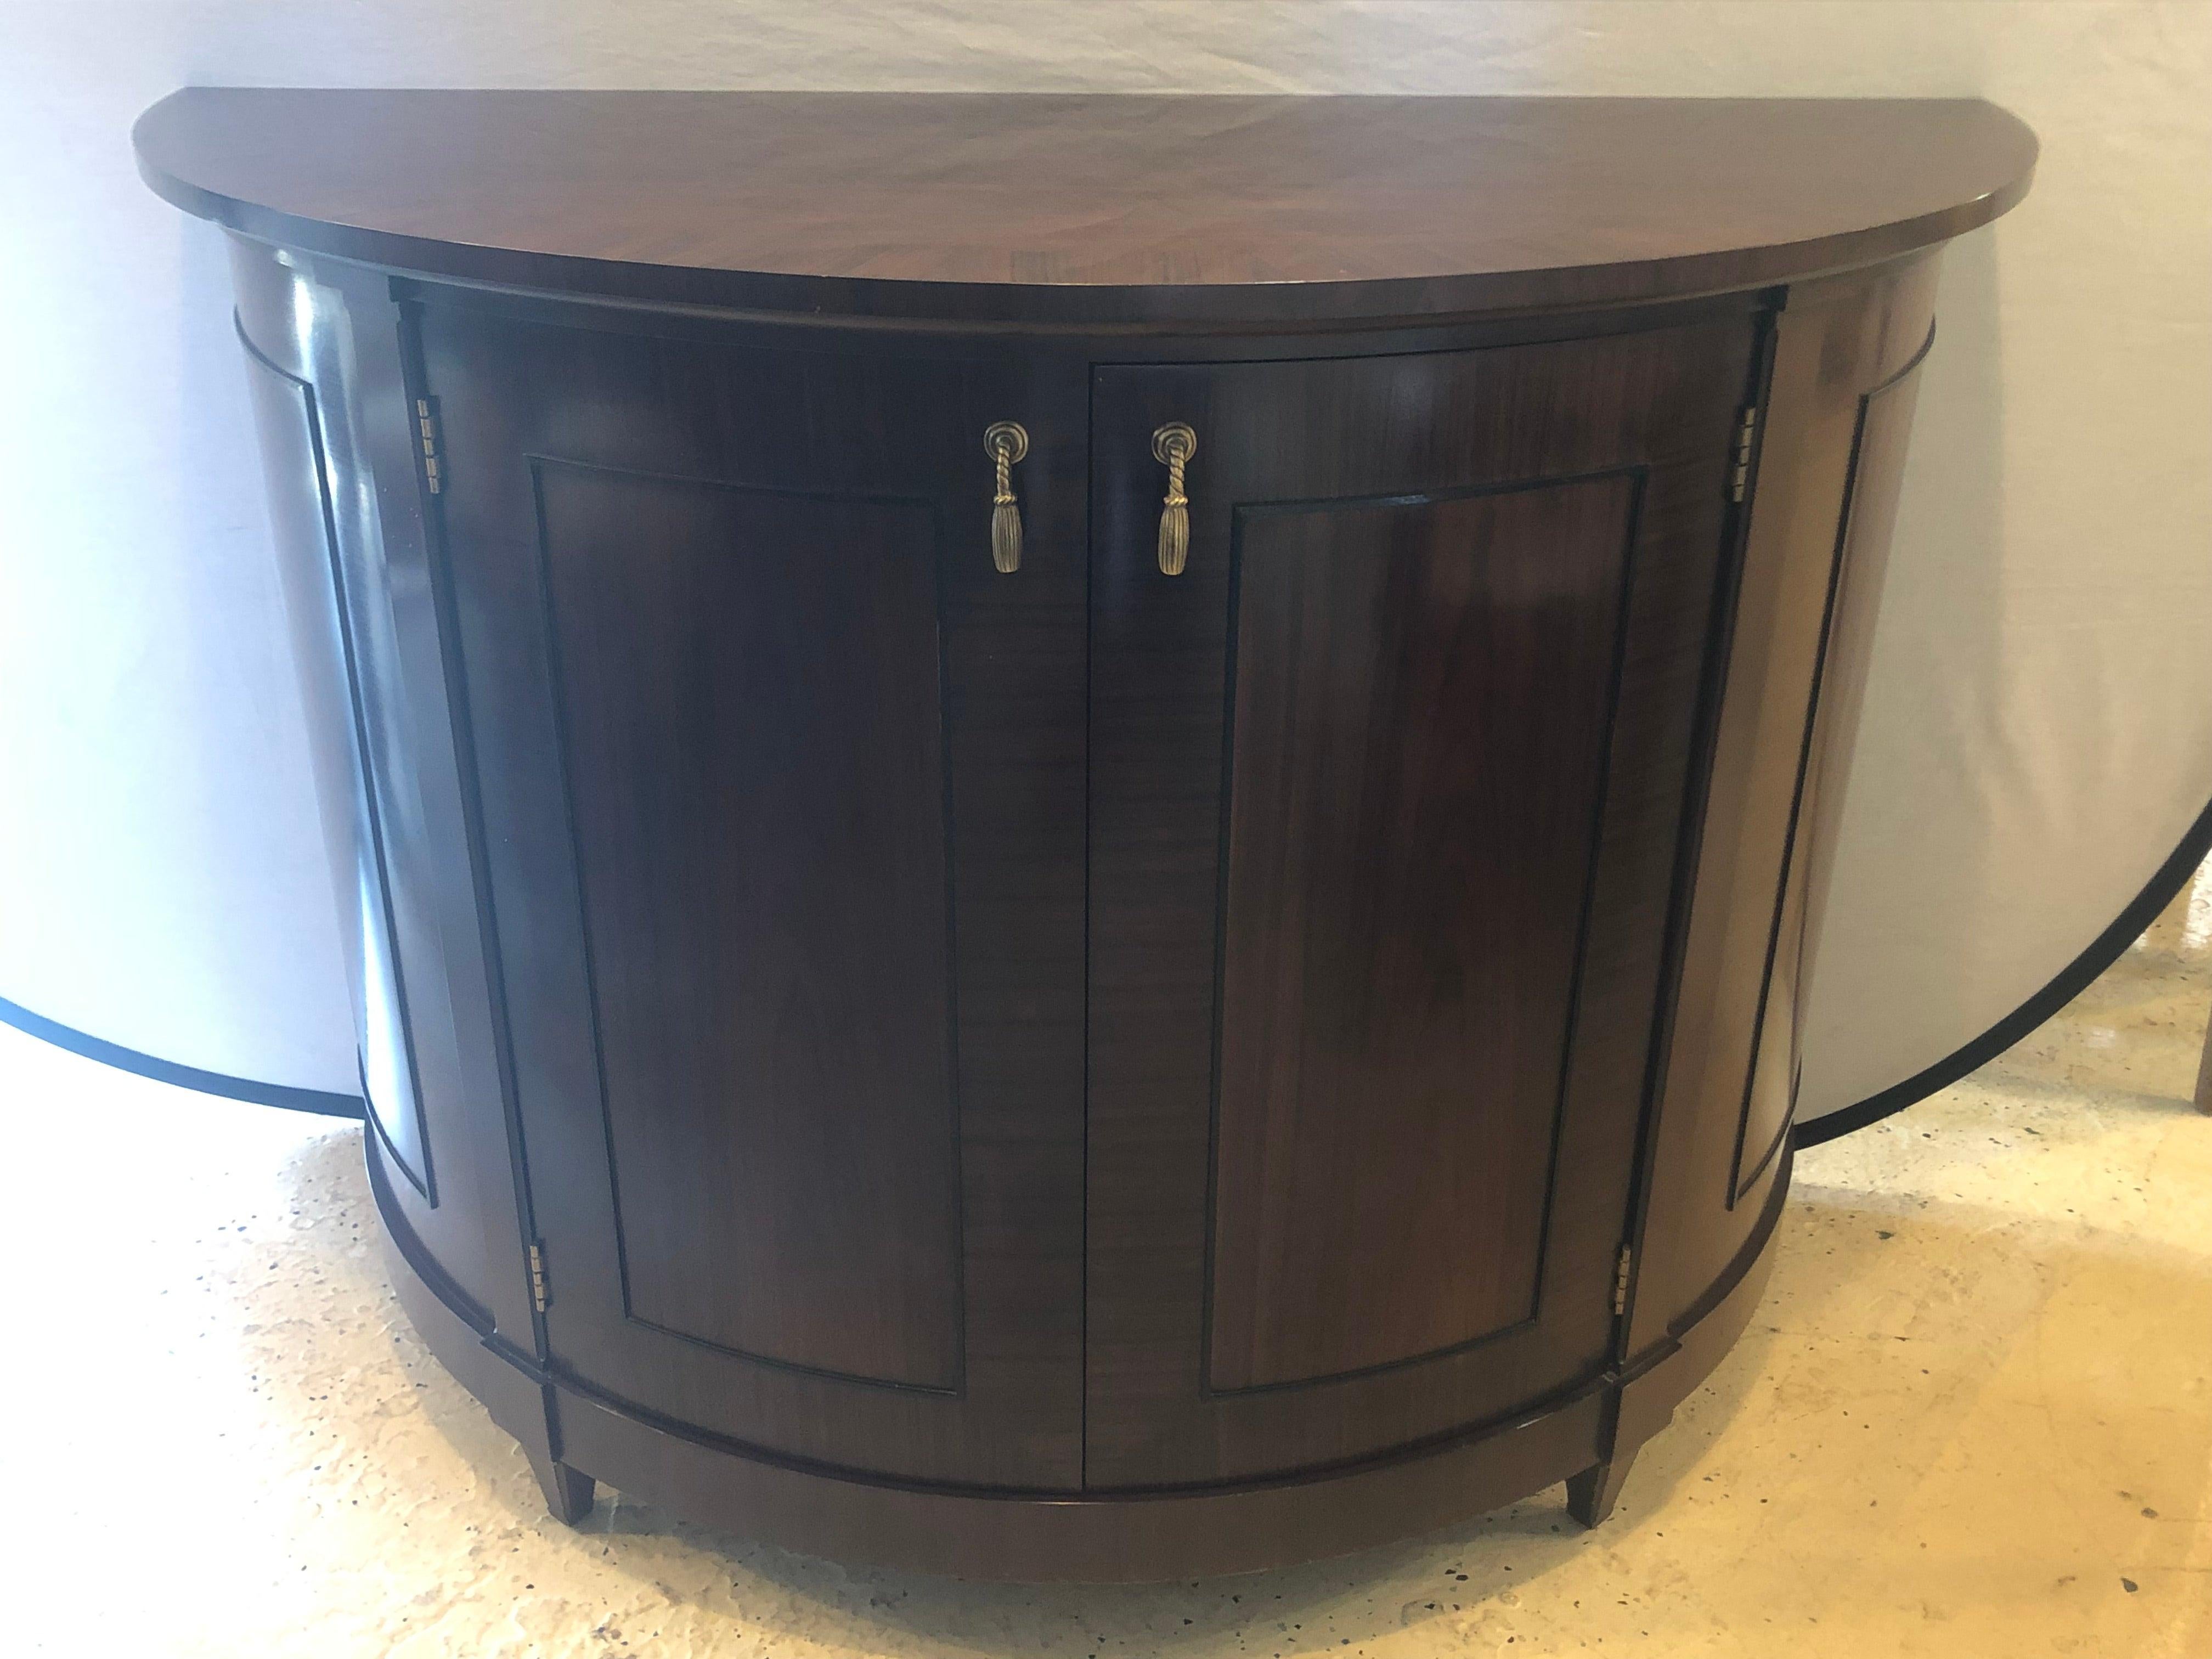 A baker flame mahogany sideboard or serving cabinet with ebony inlays. This Georgian inspired Baker Furniture Company serving cabinet or sideboard has a deep demilune form with a fitted interior. The back bearing the Baker tag leading to a sharp and